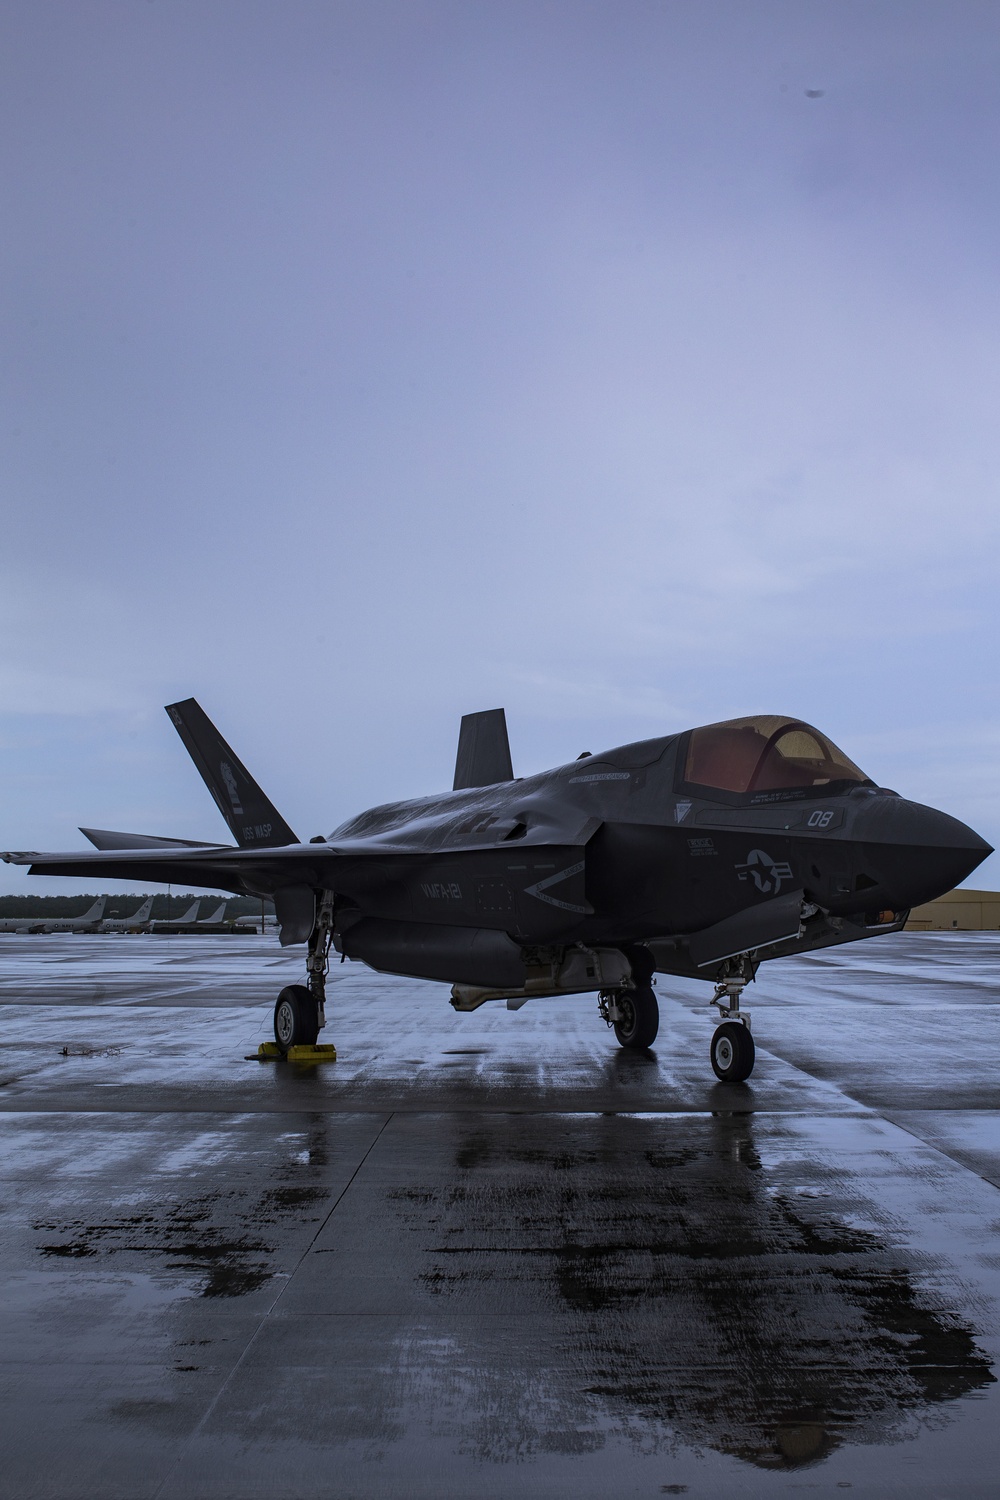 Lightning strikes at Valiant Shield: Introducing the F35 to the joint combat environment